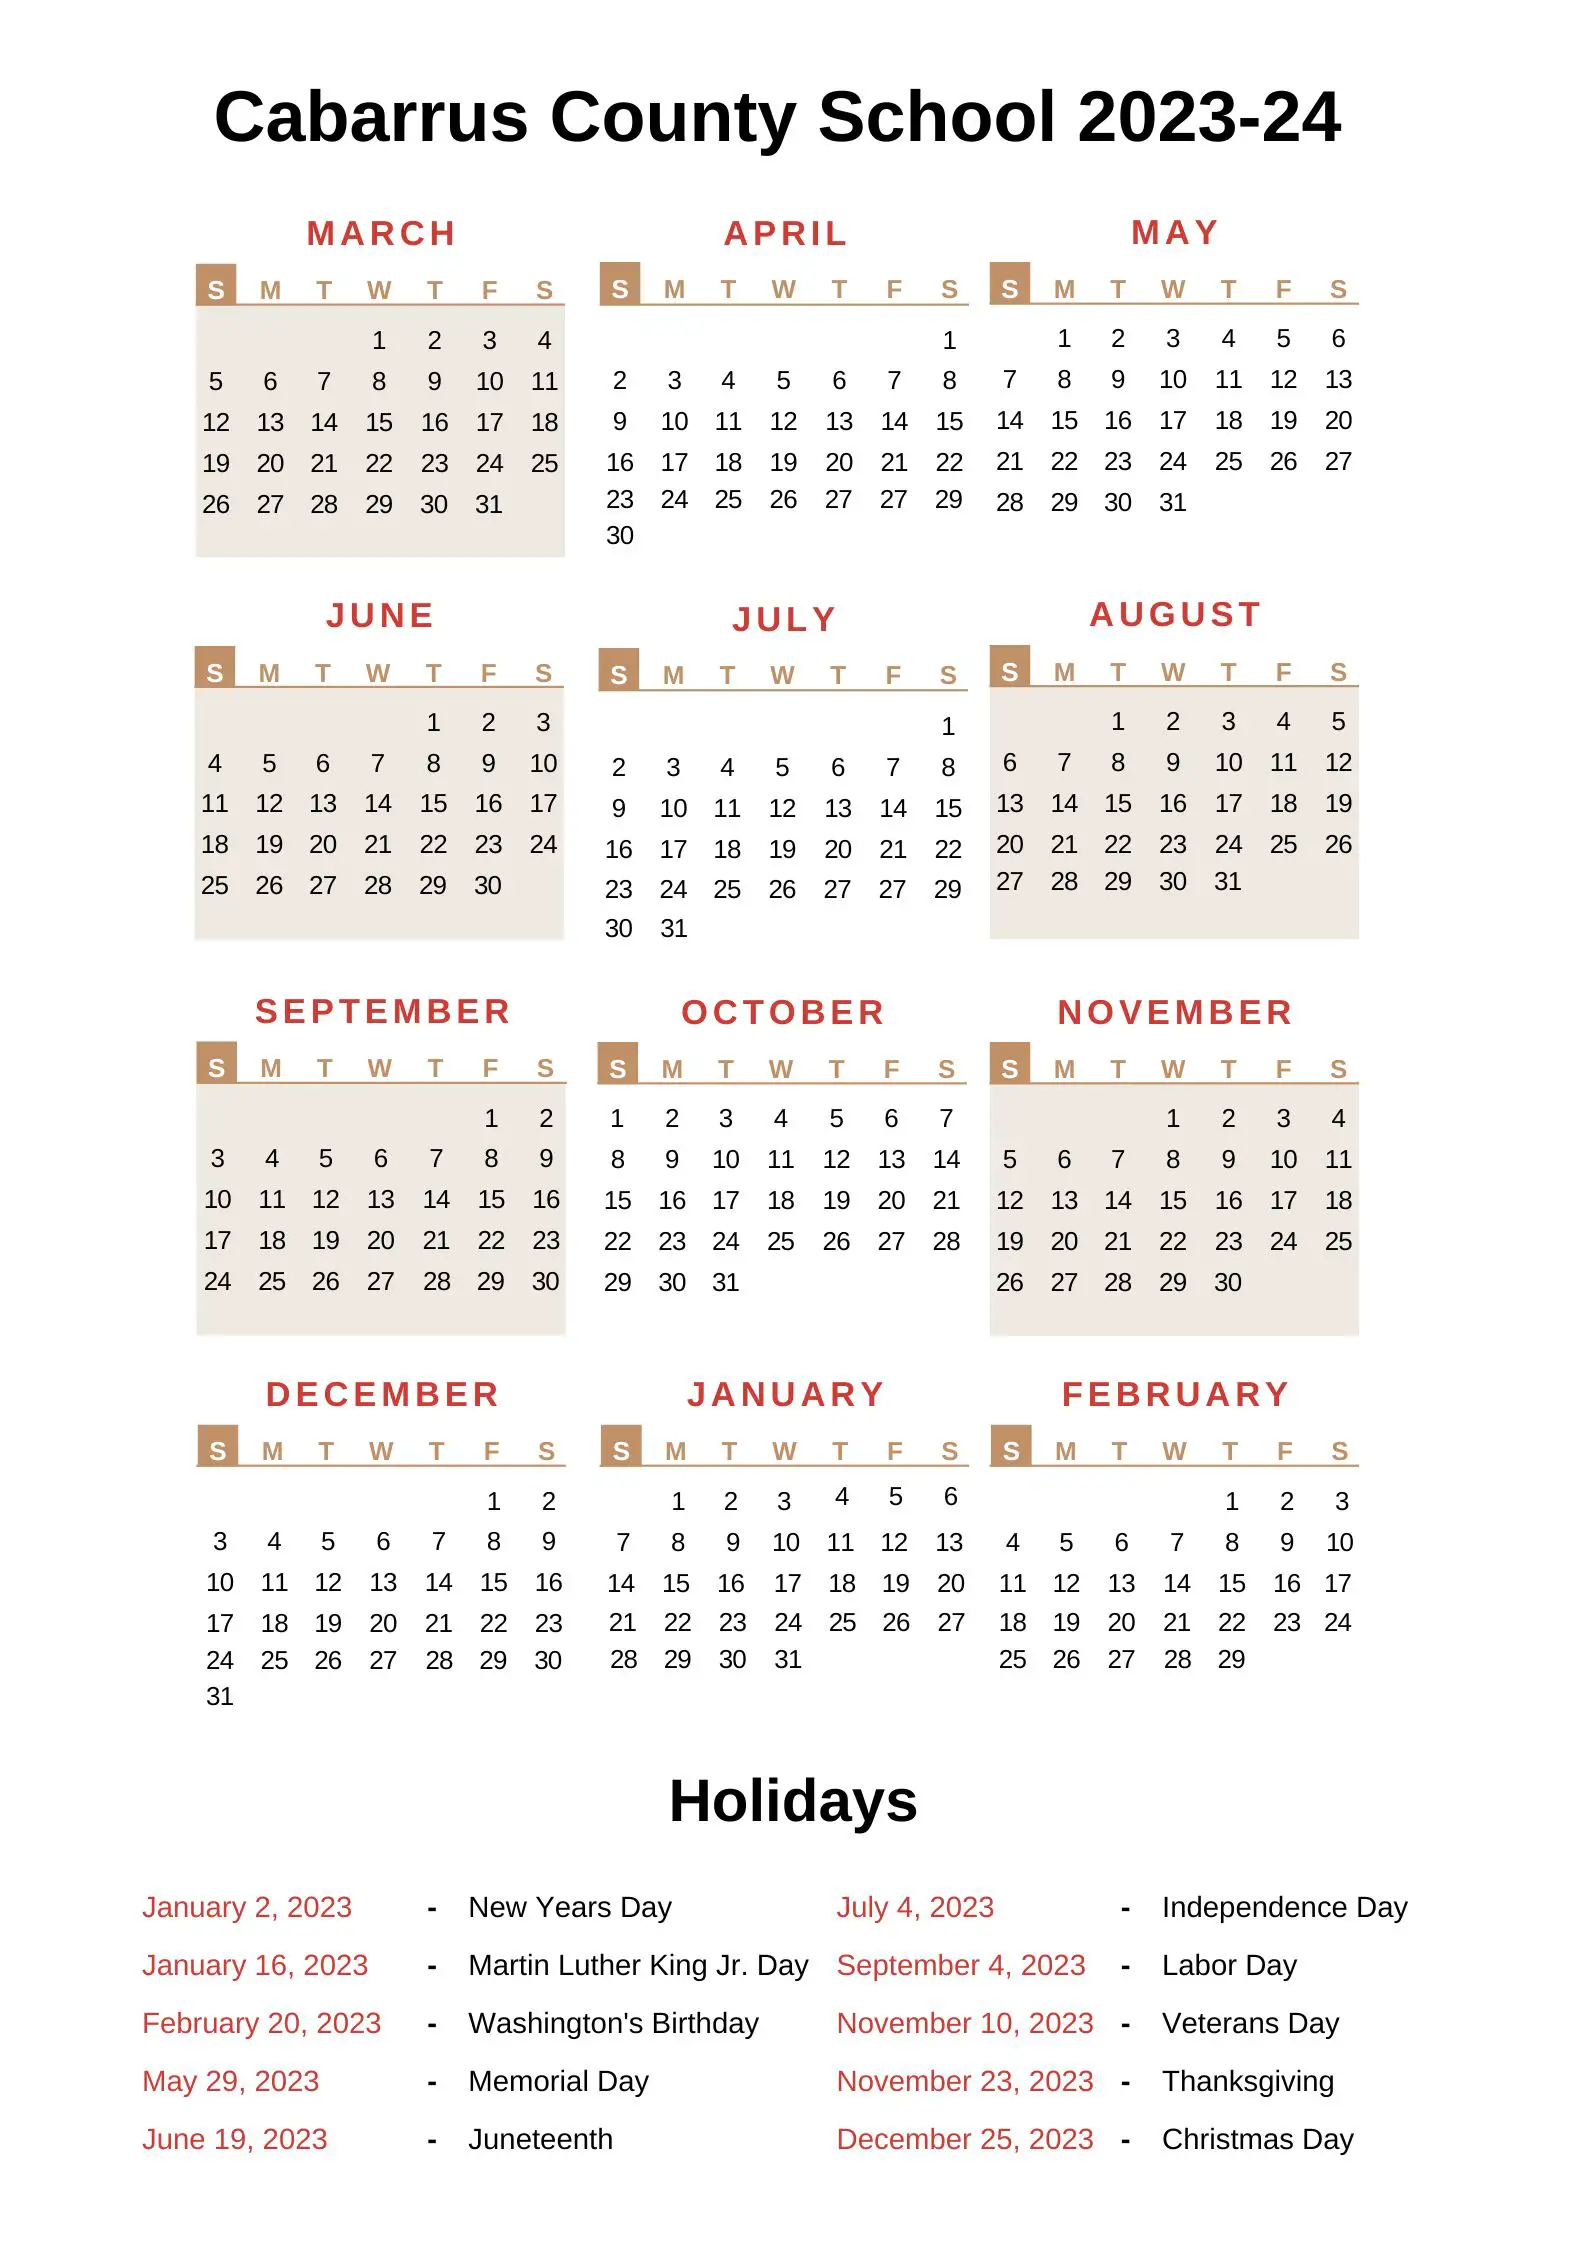 cabarrus-county-schools-calendar-2023-24-with-holidays